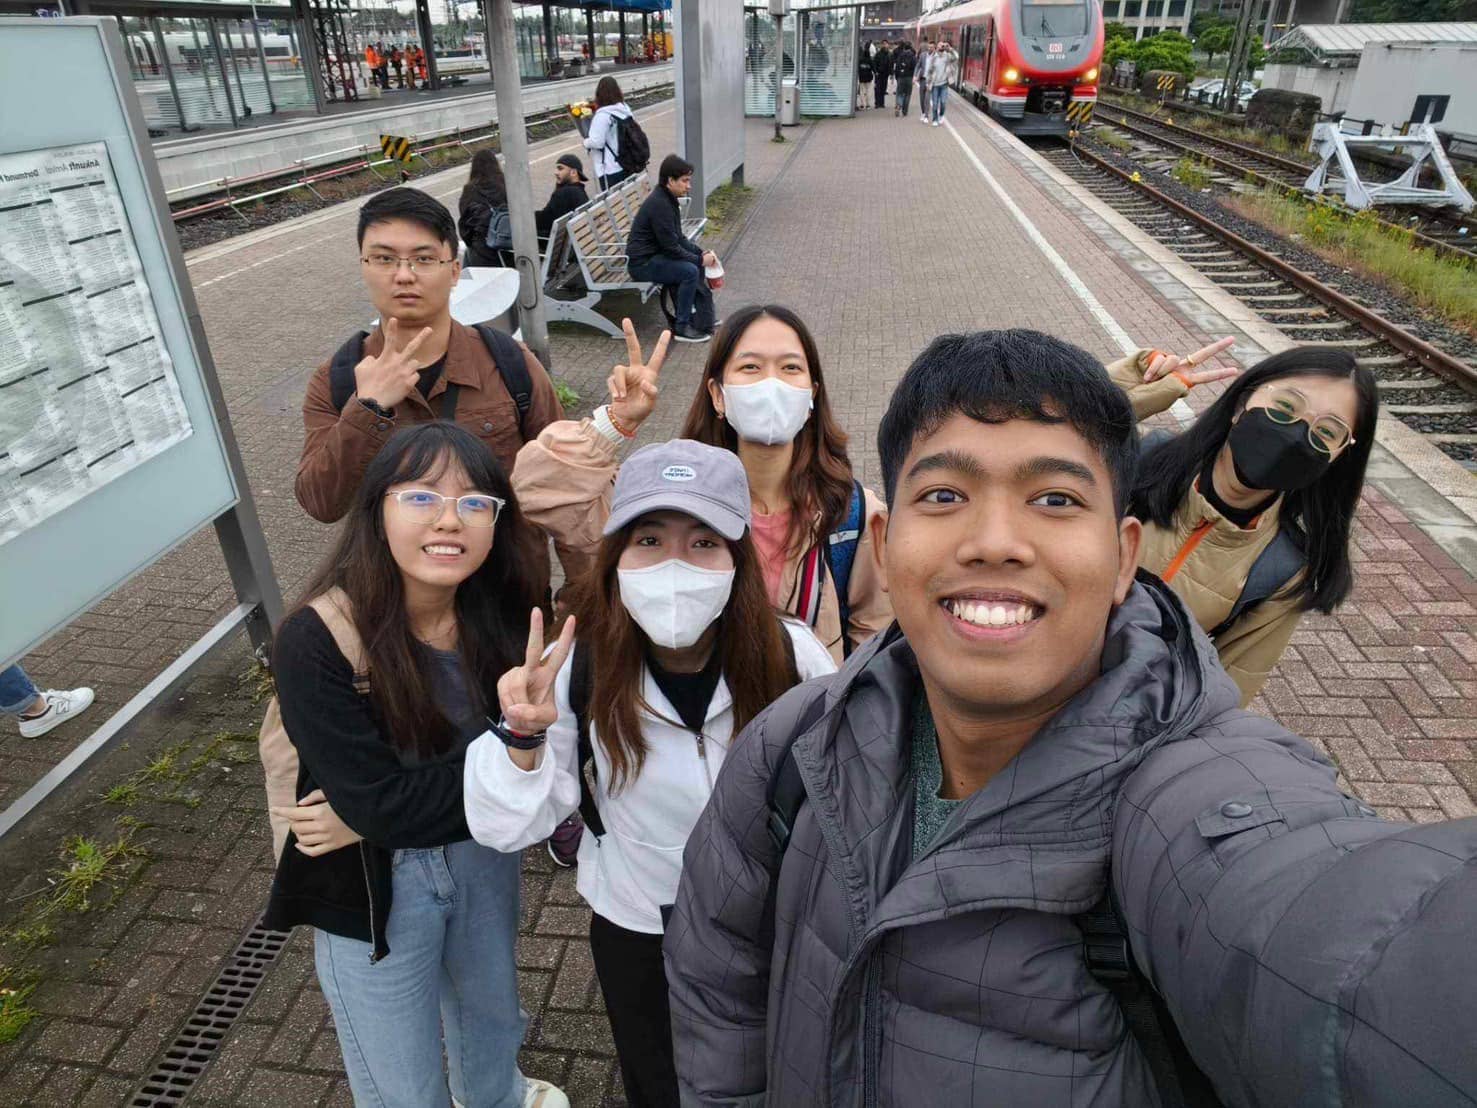 UTCC-iSM Students in Germany for 2 months